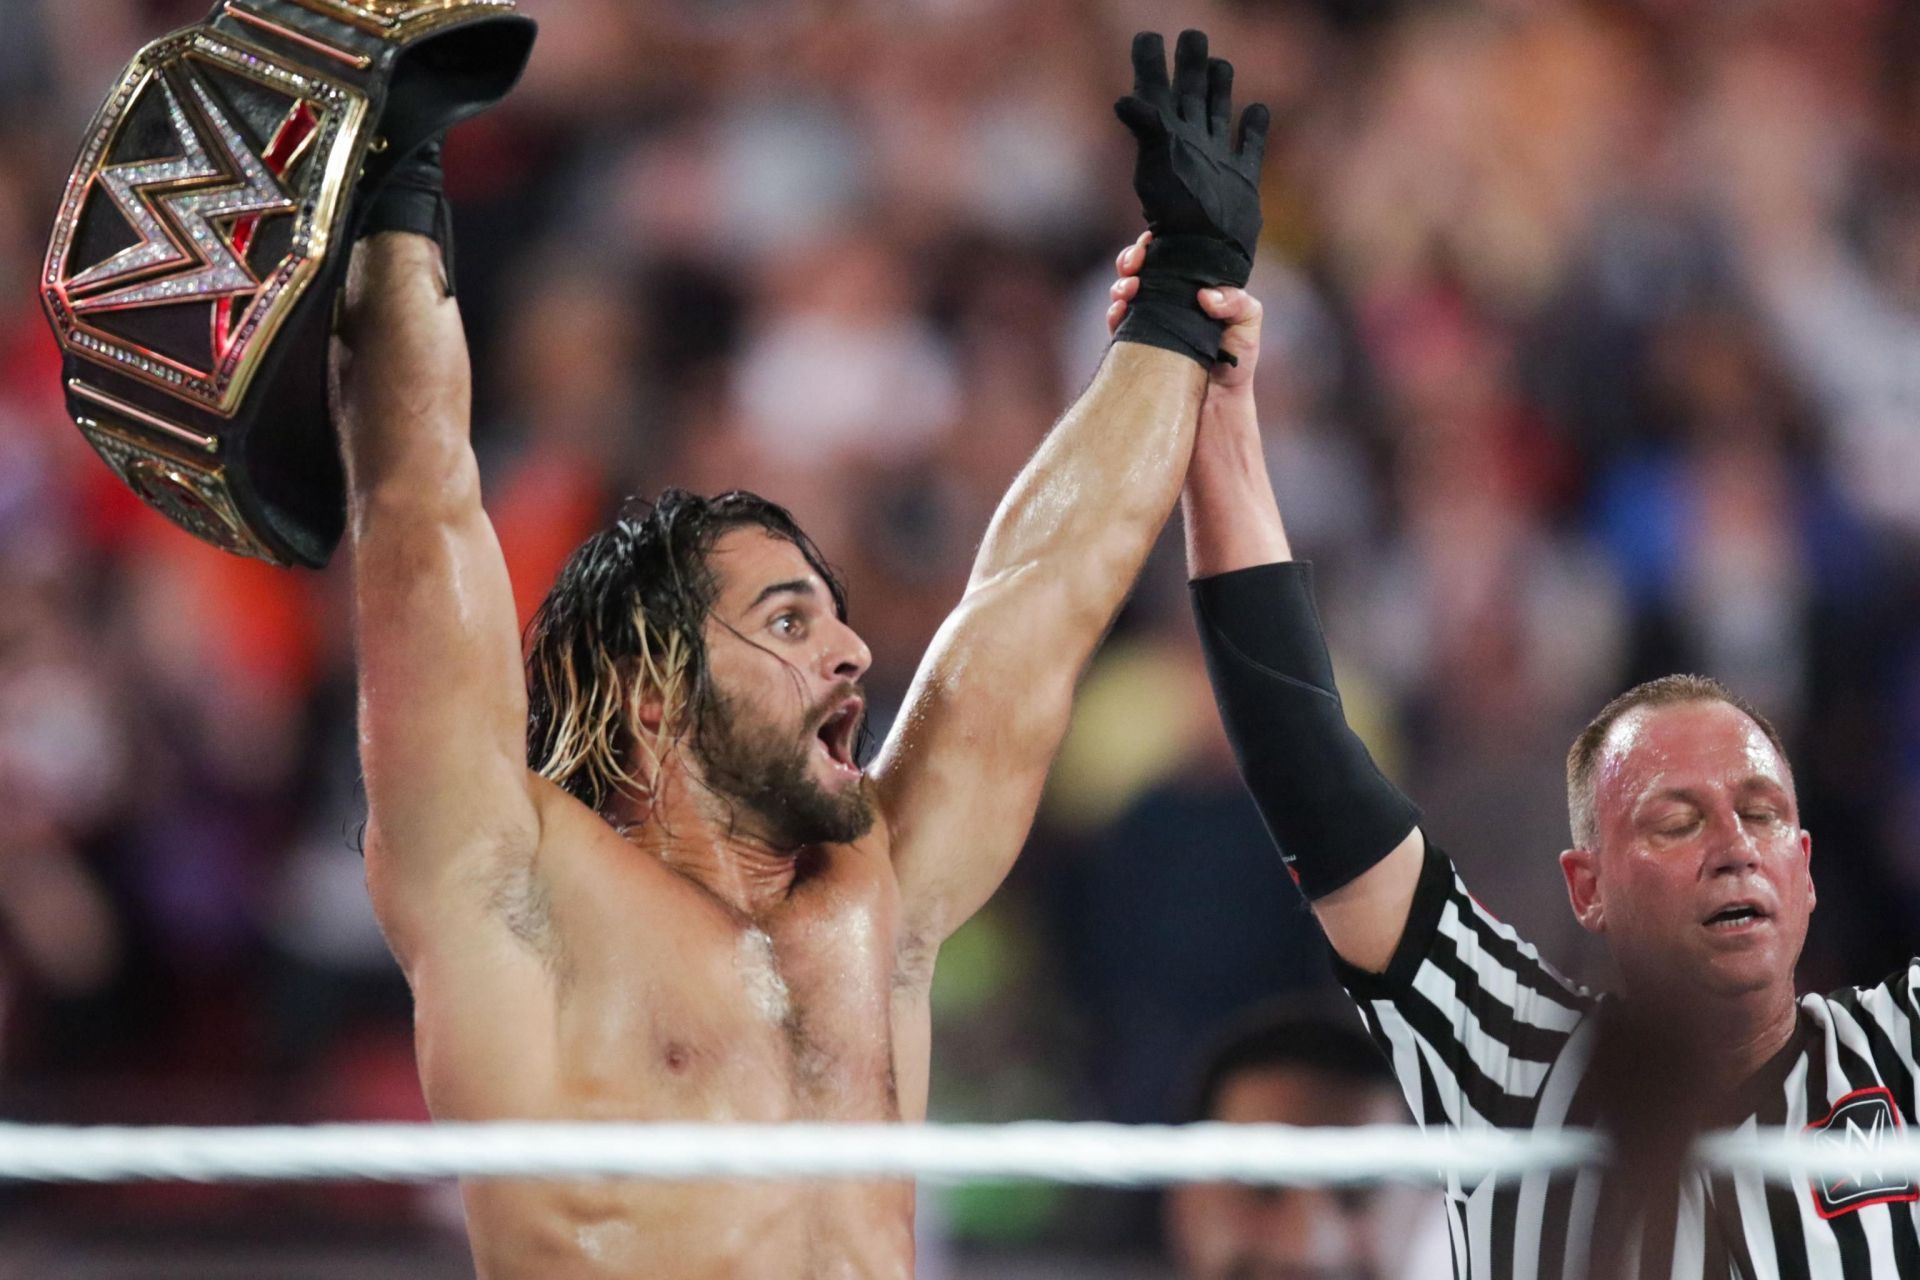 Rollins waited to cash in, leading to one of the most memorable moments in WWE history!